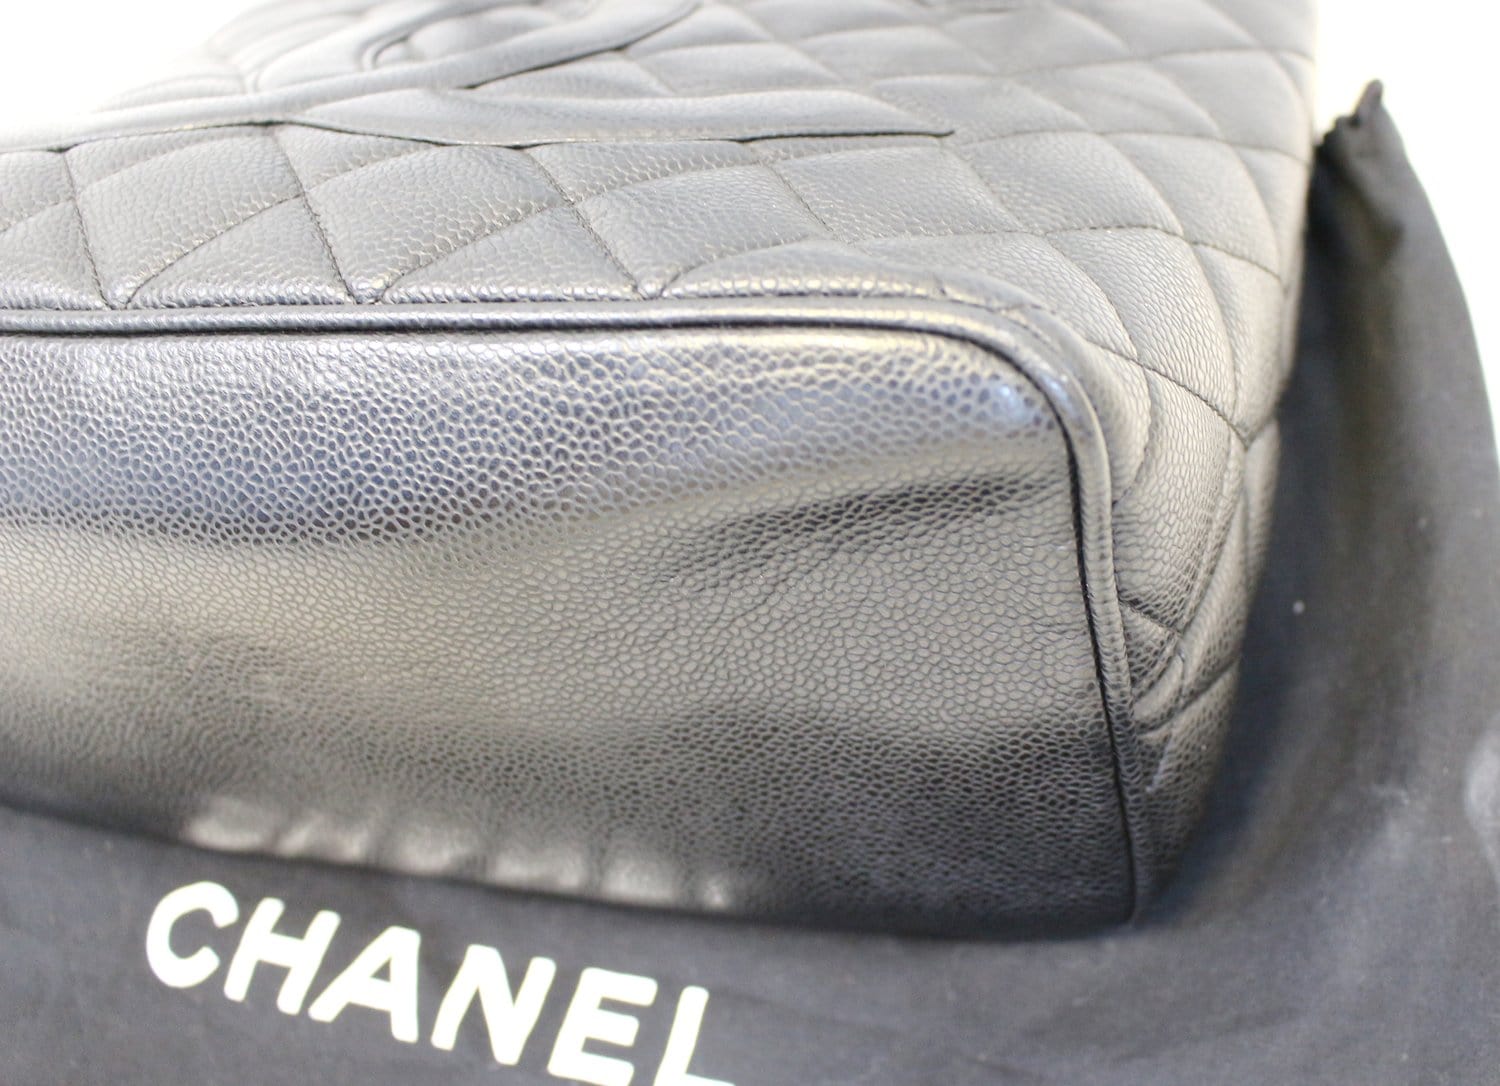 CHANEL, Bags, Authentic Chanel Caviar Quilted Medallion Tote